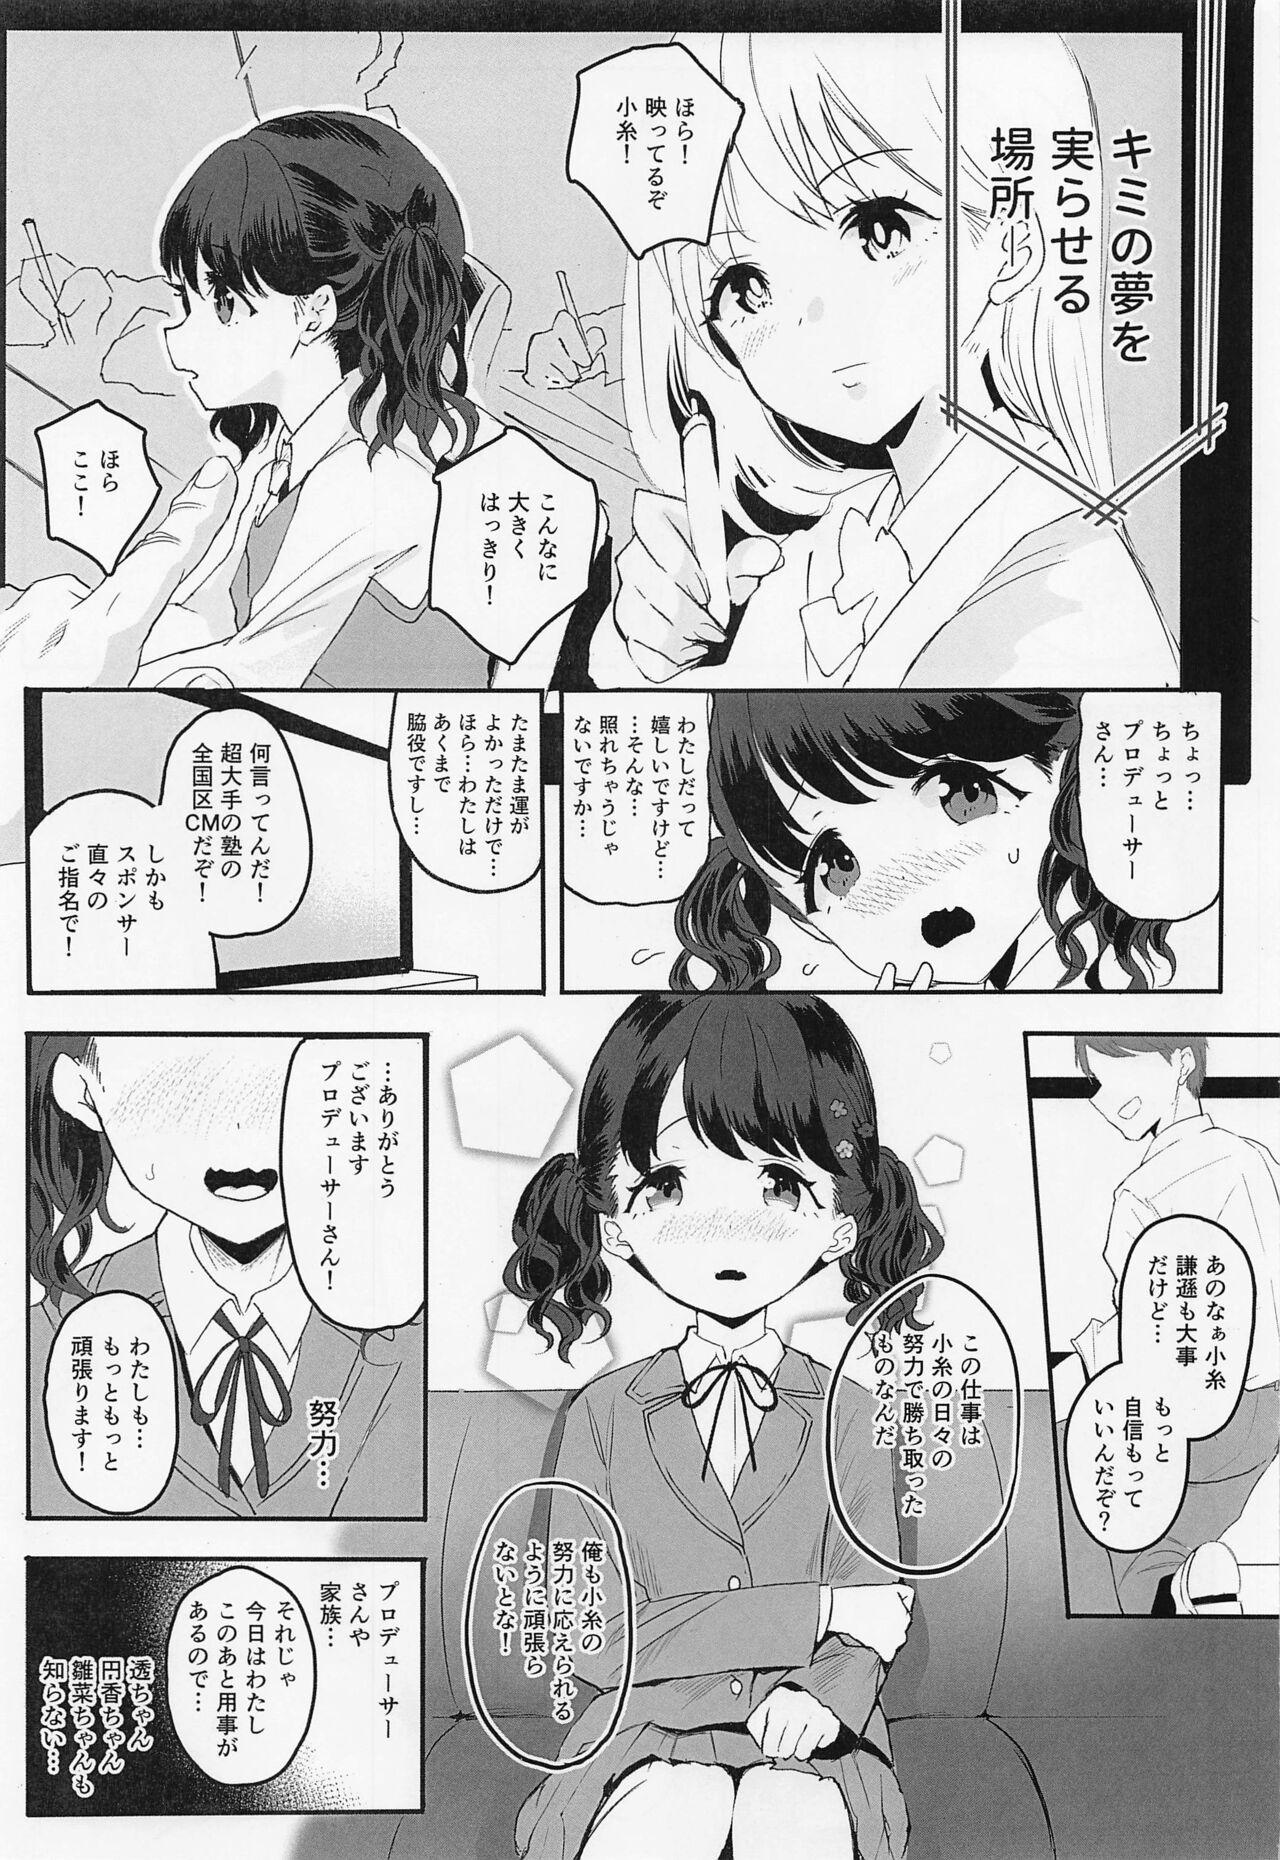 Pounded Majime de Doryokuka datte. 2 - The idolmaster Cum Swallowing - Page 2